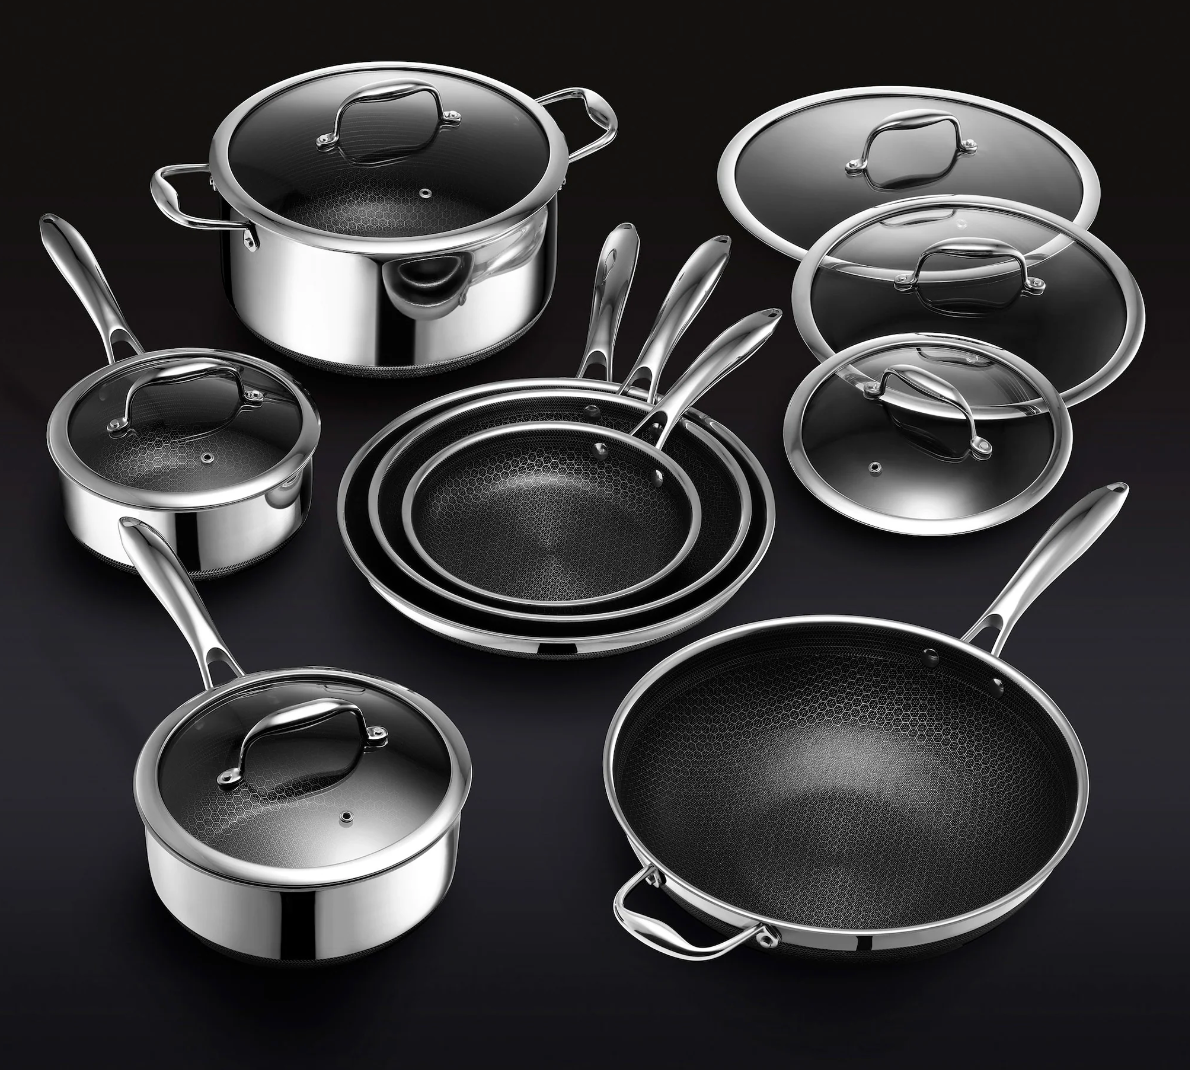 Get The HexClad Pan that Cameron Diaz and Halle Berry Love for 30% Off